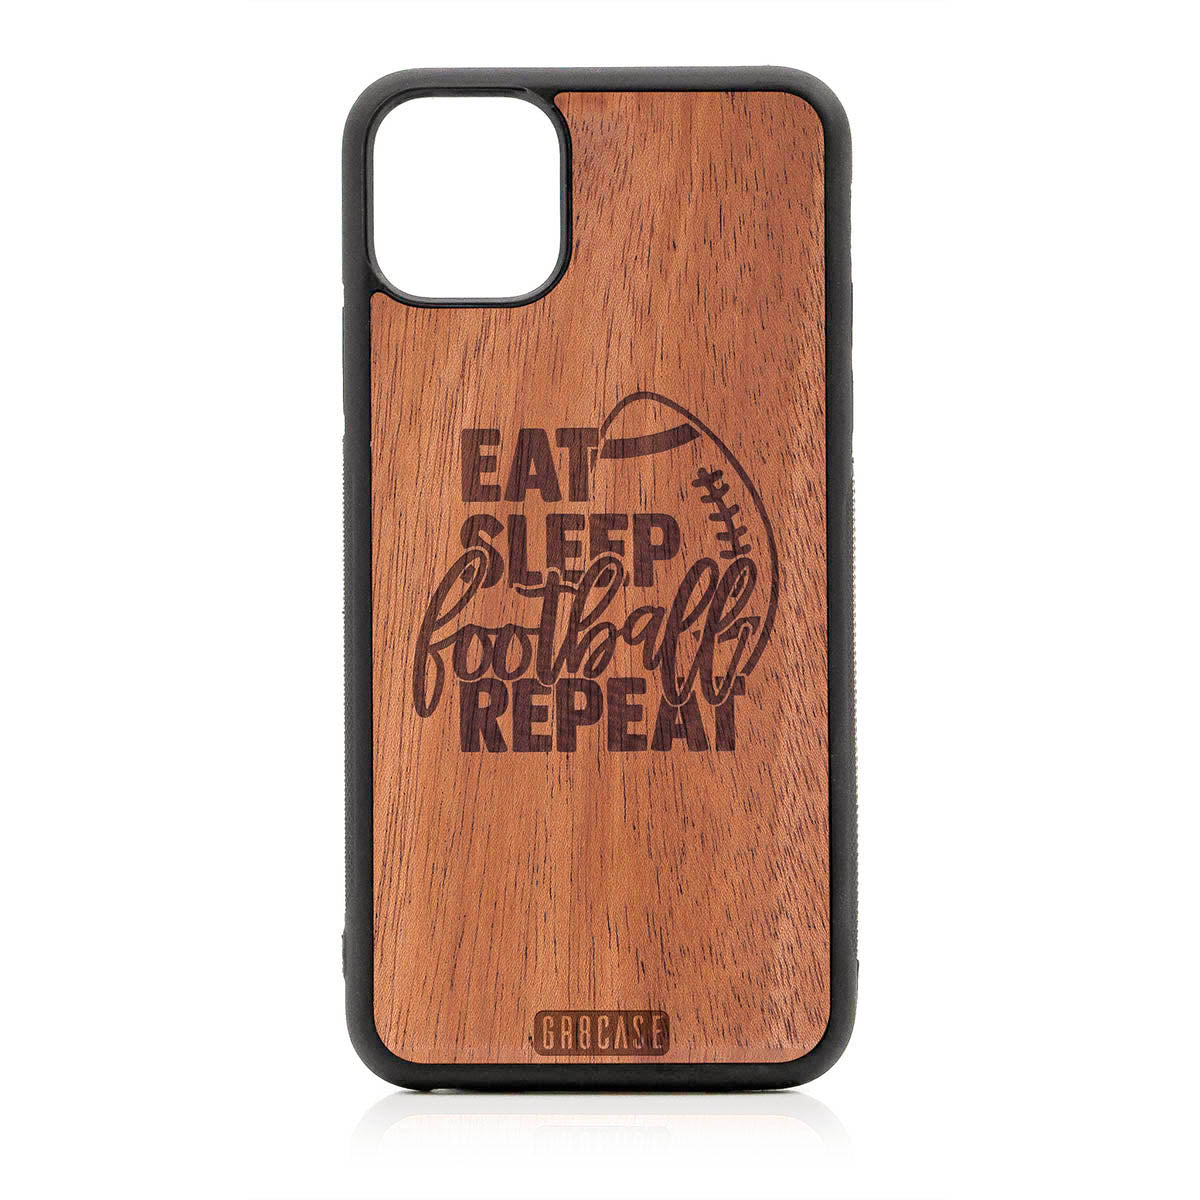 Eat Sleep Football Repeat Design Wood Case For iPhone 11 Pro Max